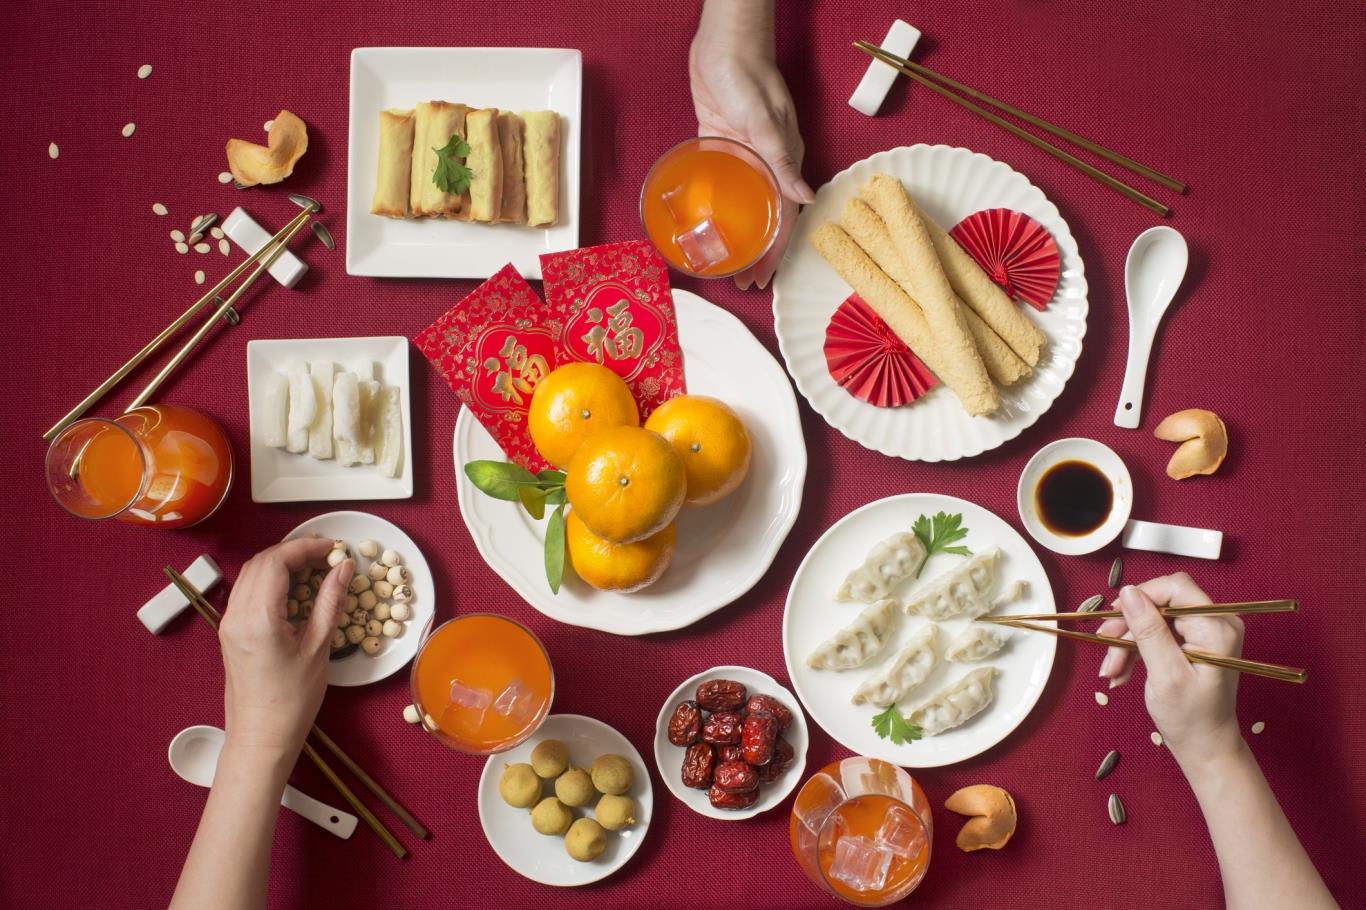 Foods to celebrate Lunar New Year in China